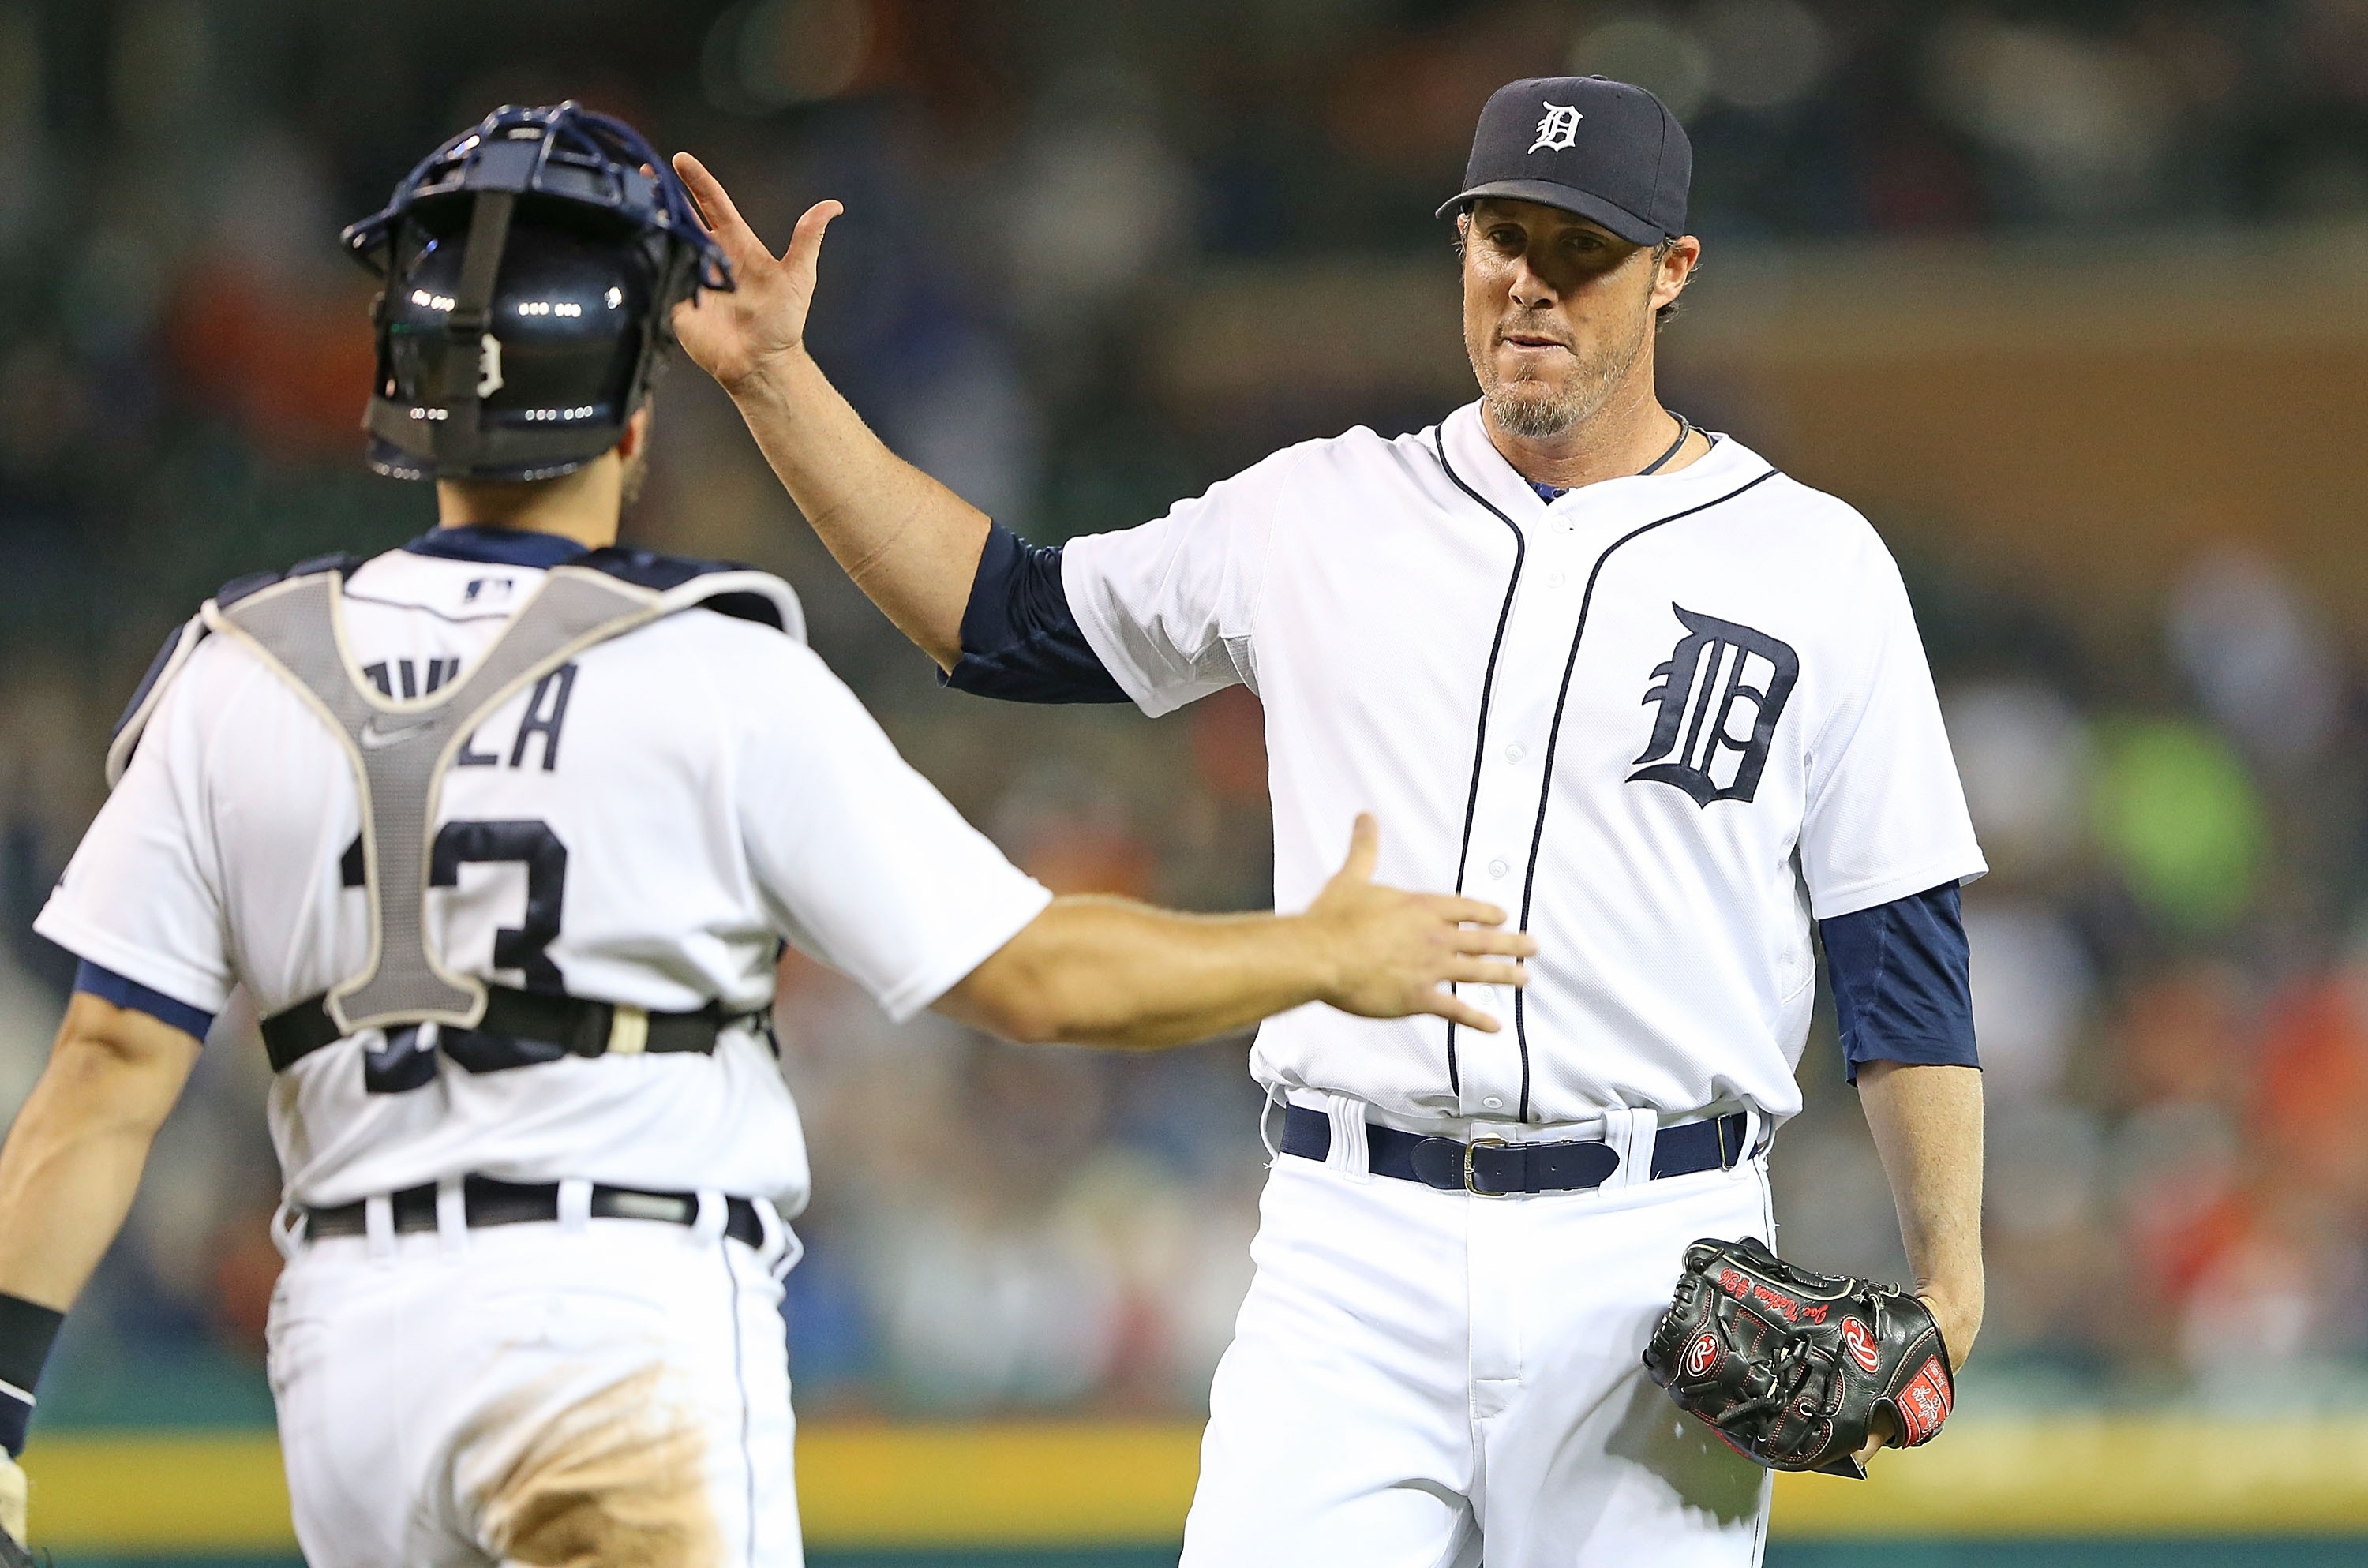 Will closer Joe Nathan defy his postseason past and be effective for the Tigers? (Getty Images)